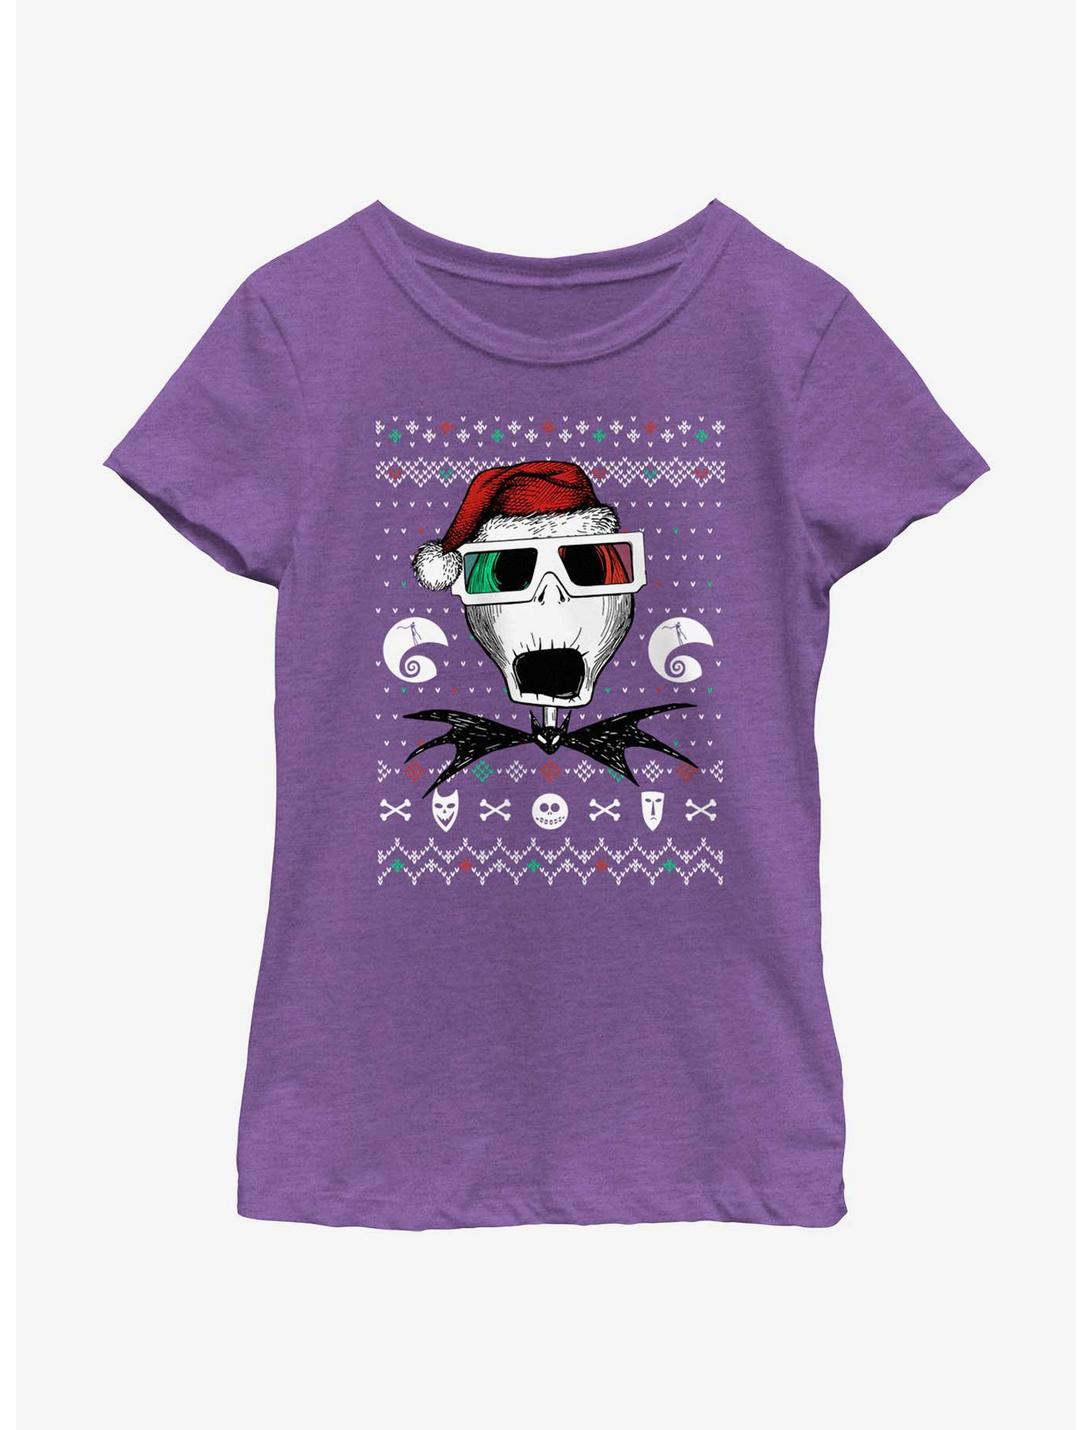 Disney Nightmare Before Christmas Ugly Holiday Jack Holiday Vision Youth Girls T-Shirt, PURPLE BERRY, hi-res